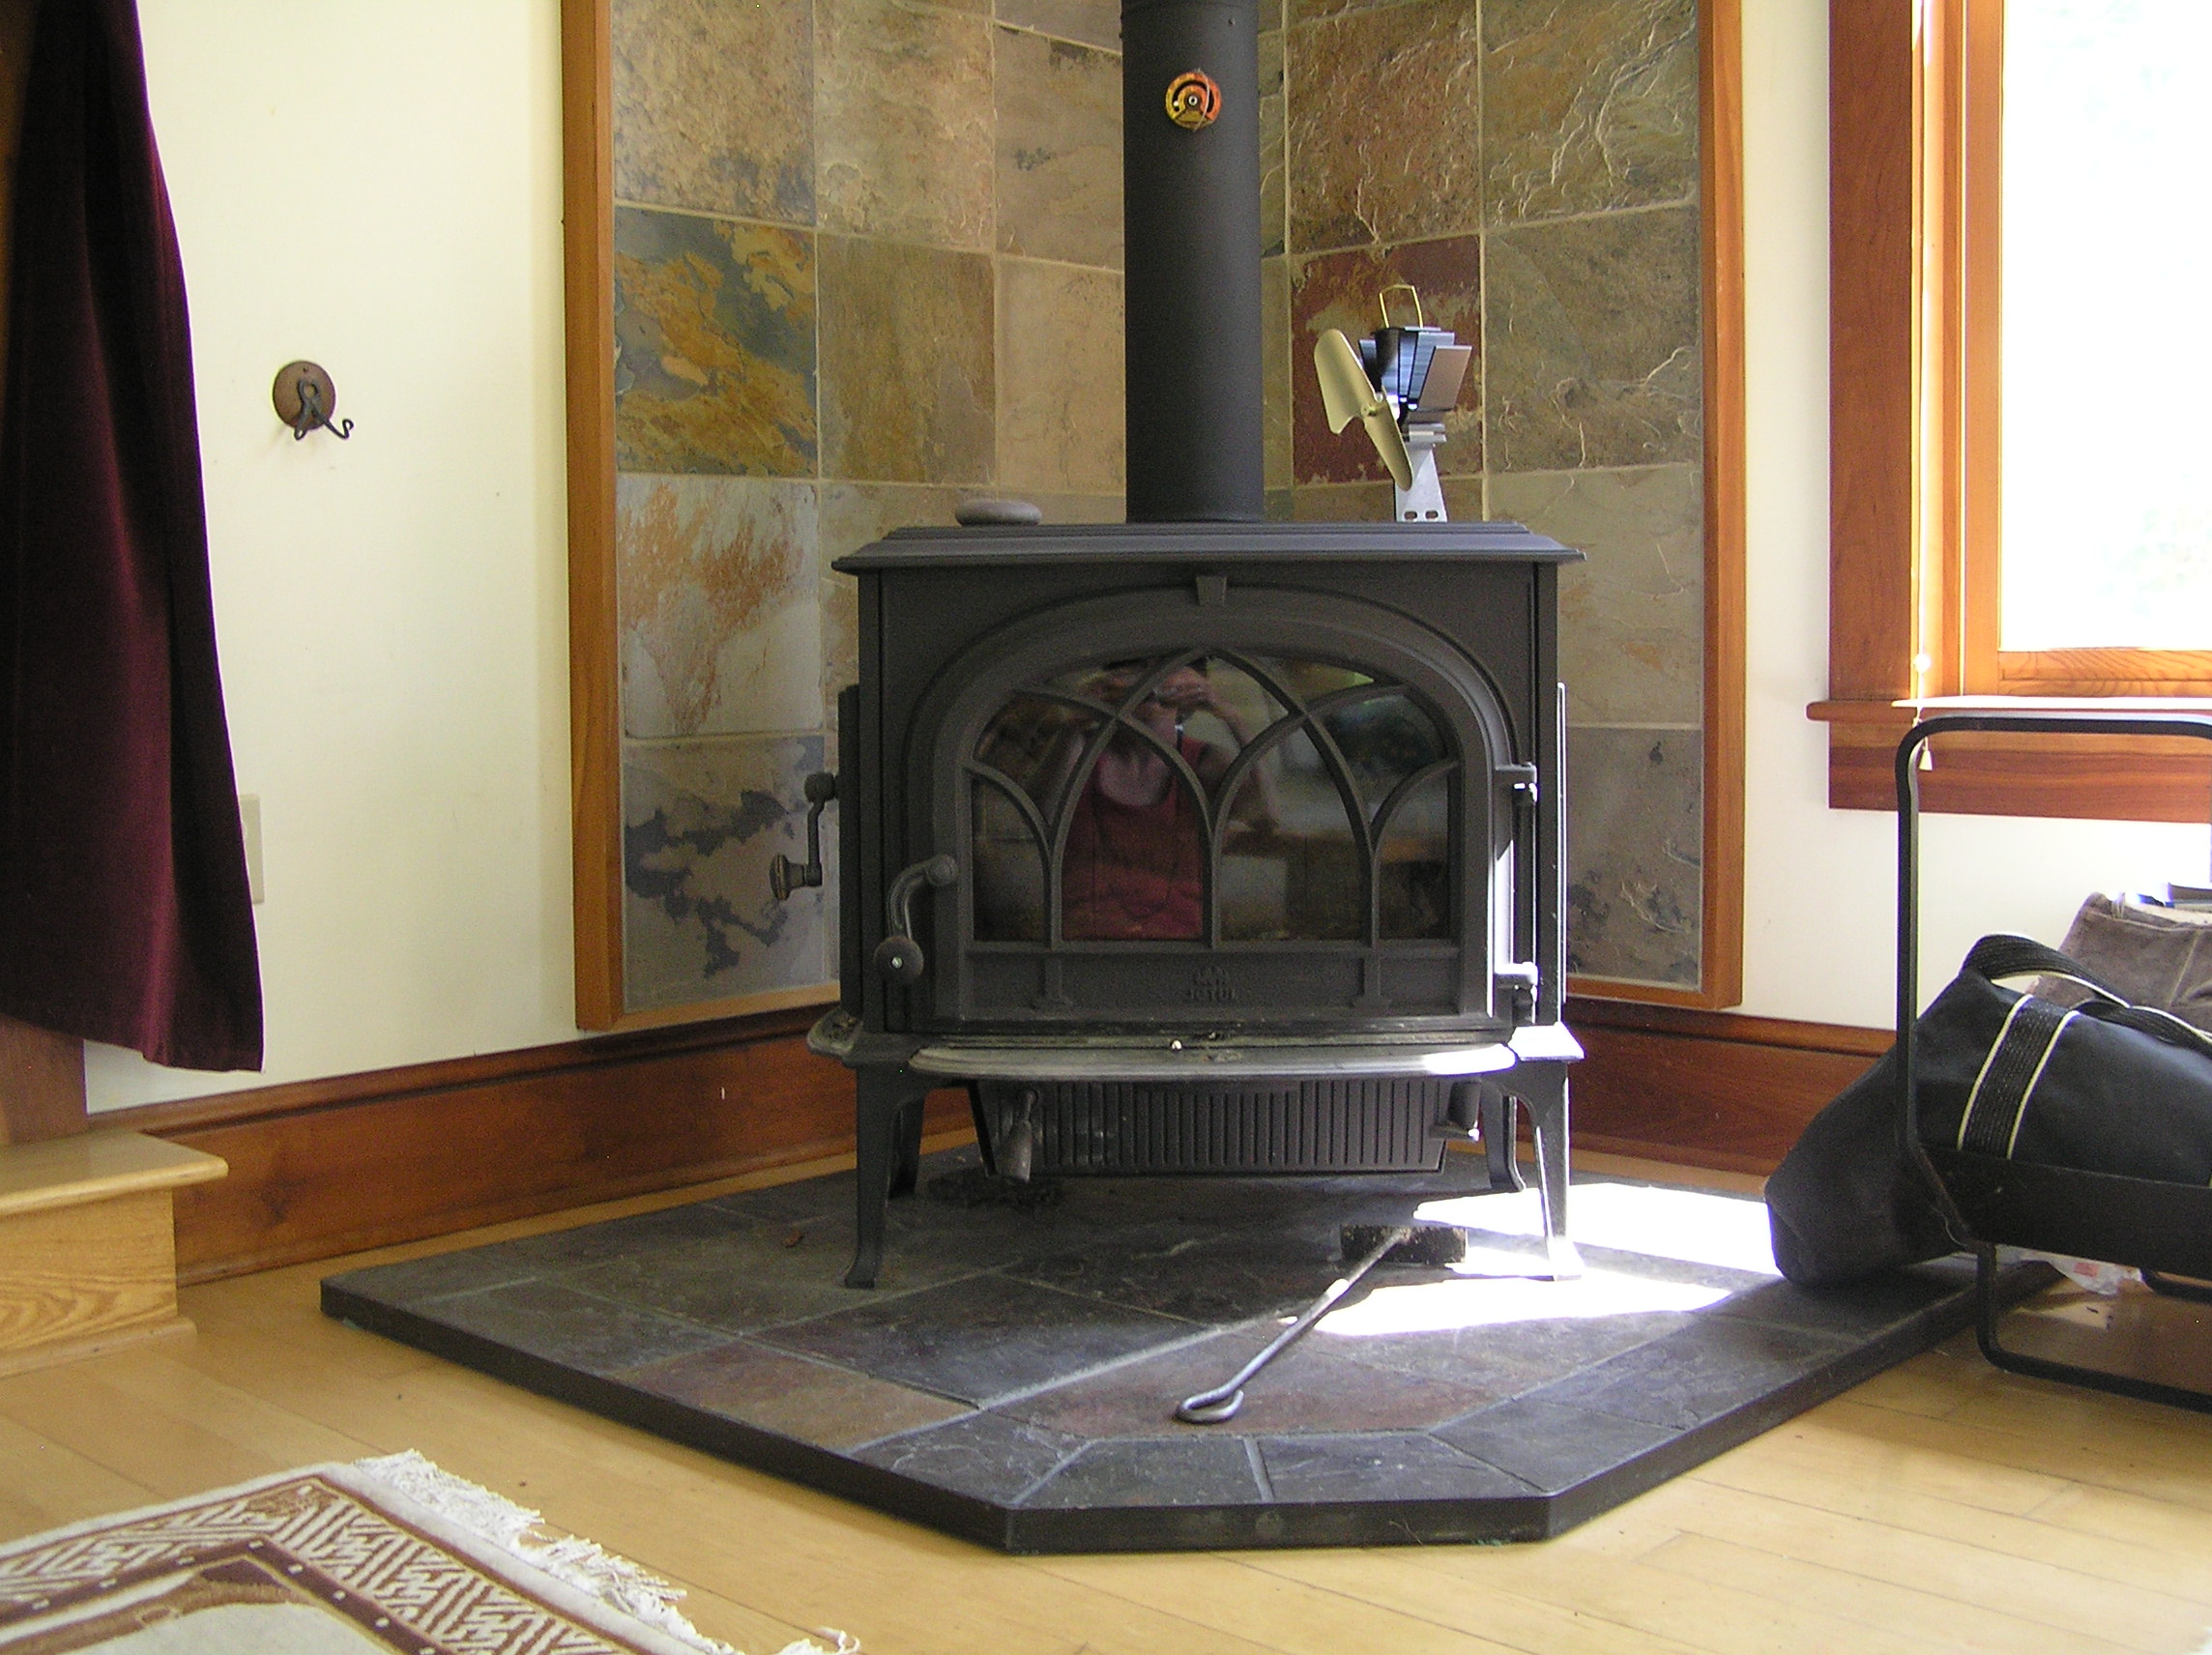 Magikflame Electric Fireplace Best Of Wood Burning Fireplace Inserts for Sale Ebay Interior Appealing